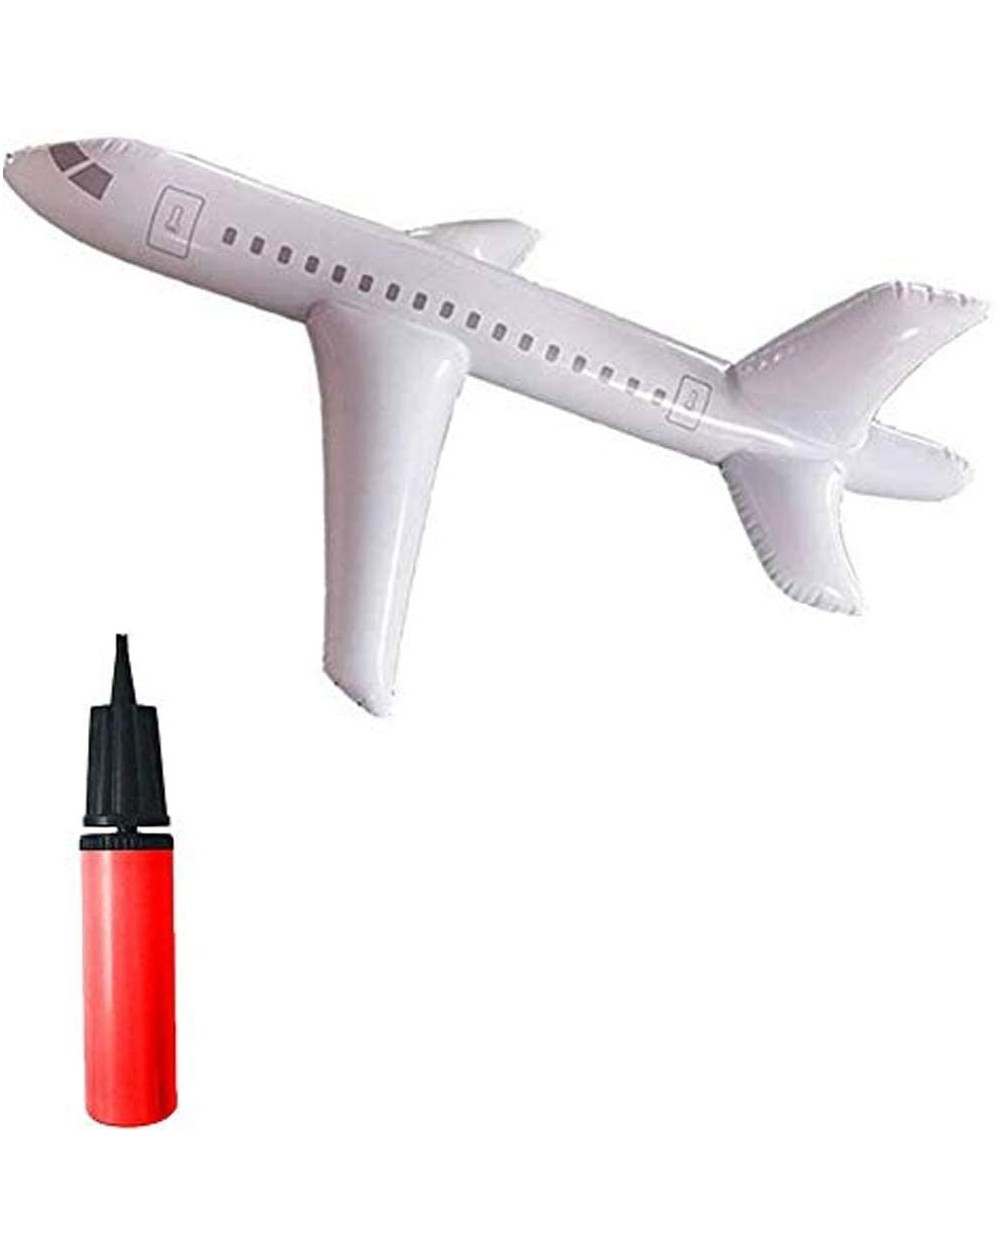 Party Games & Activities Large Inflatable Airplane- Jumbo Jet Toy Blow Up Toy Kids Costume Party Pool with Inflator (120inch)...